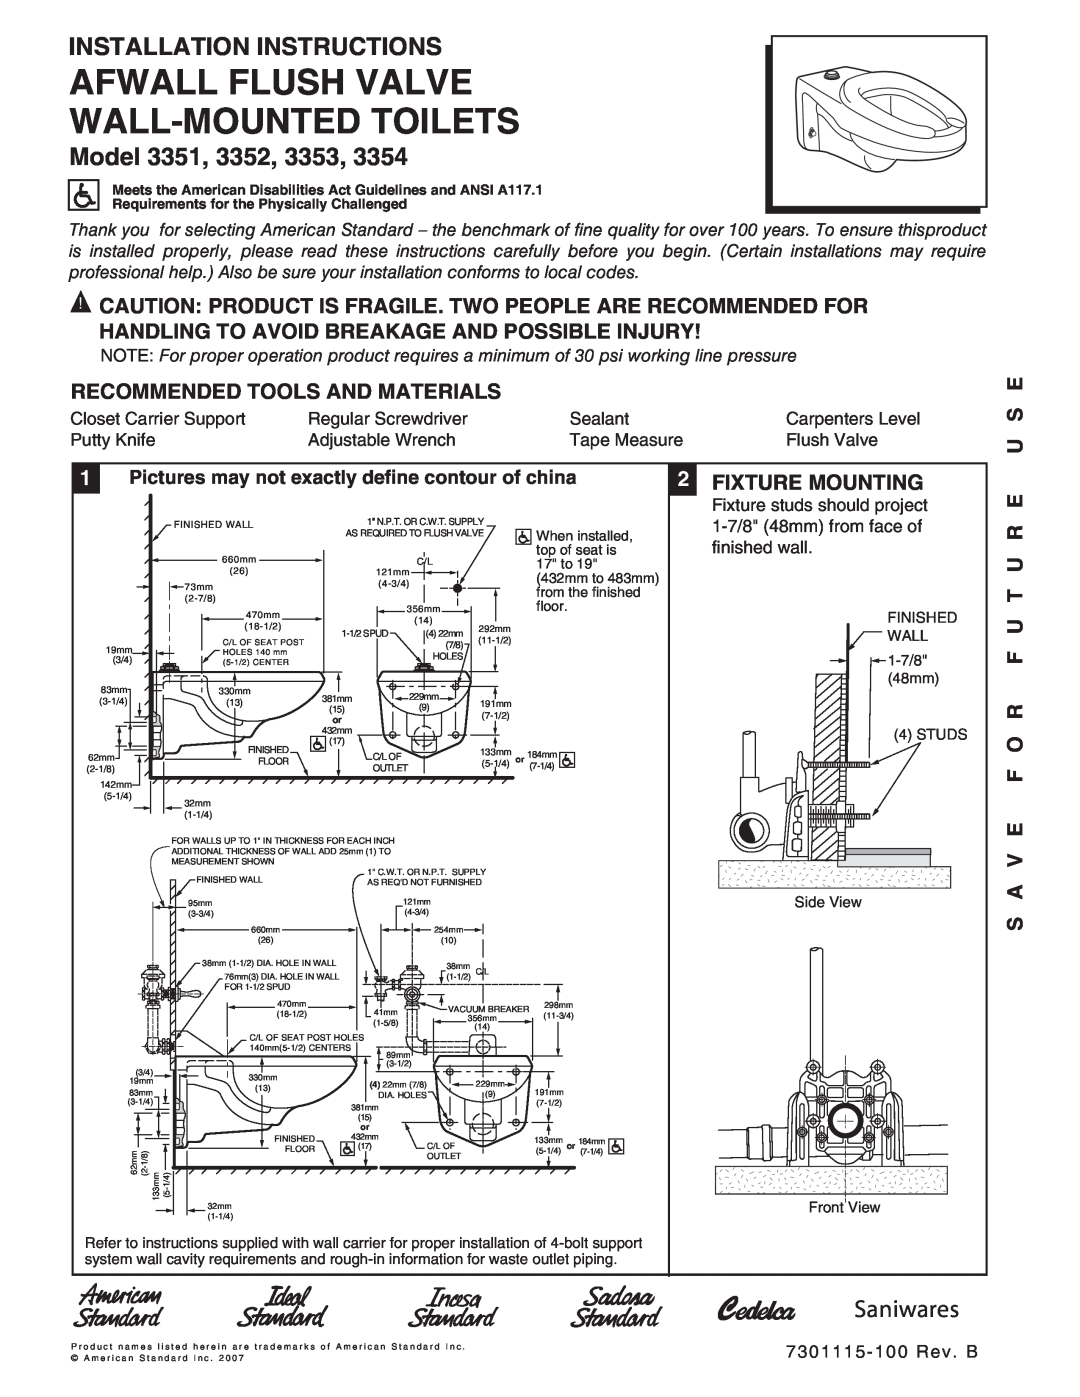 American Standard 3354 installation instructions Caution Product Is Fragile. Two People Are Recommended For, U S E 